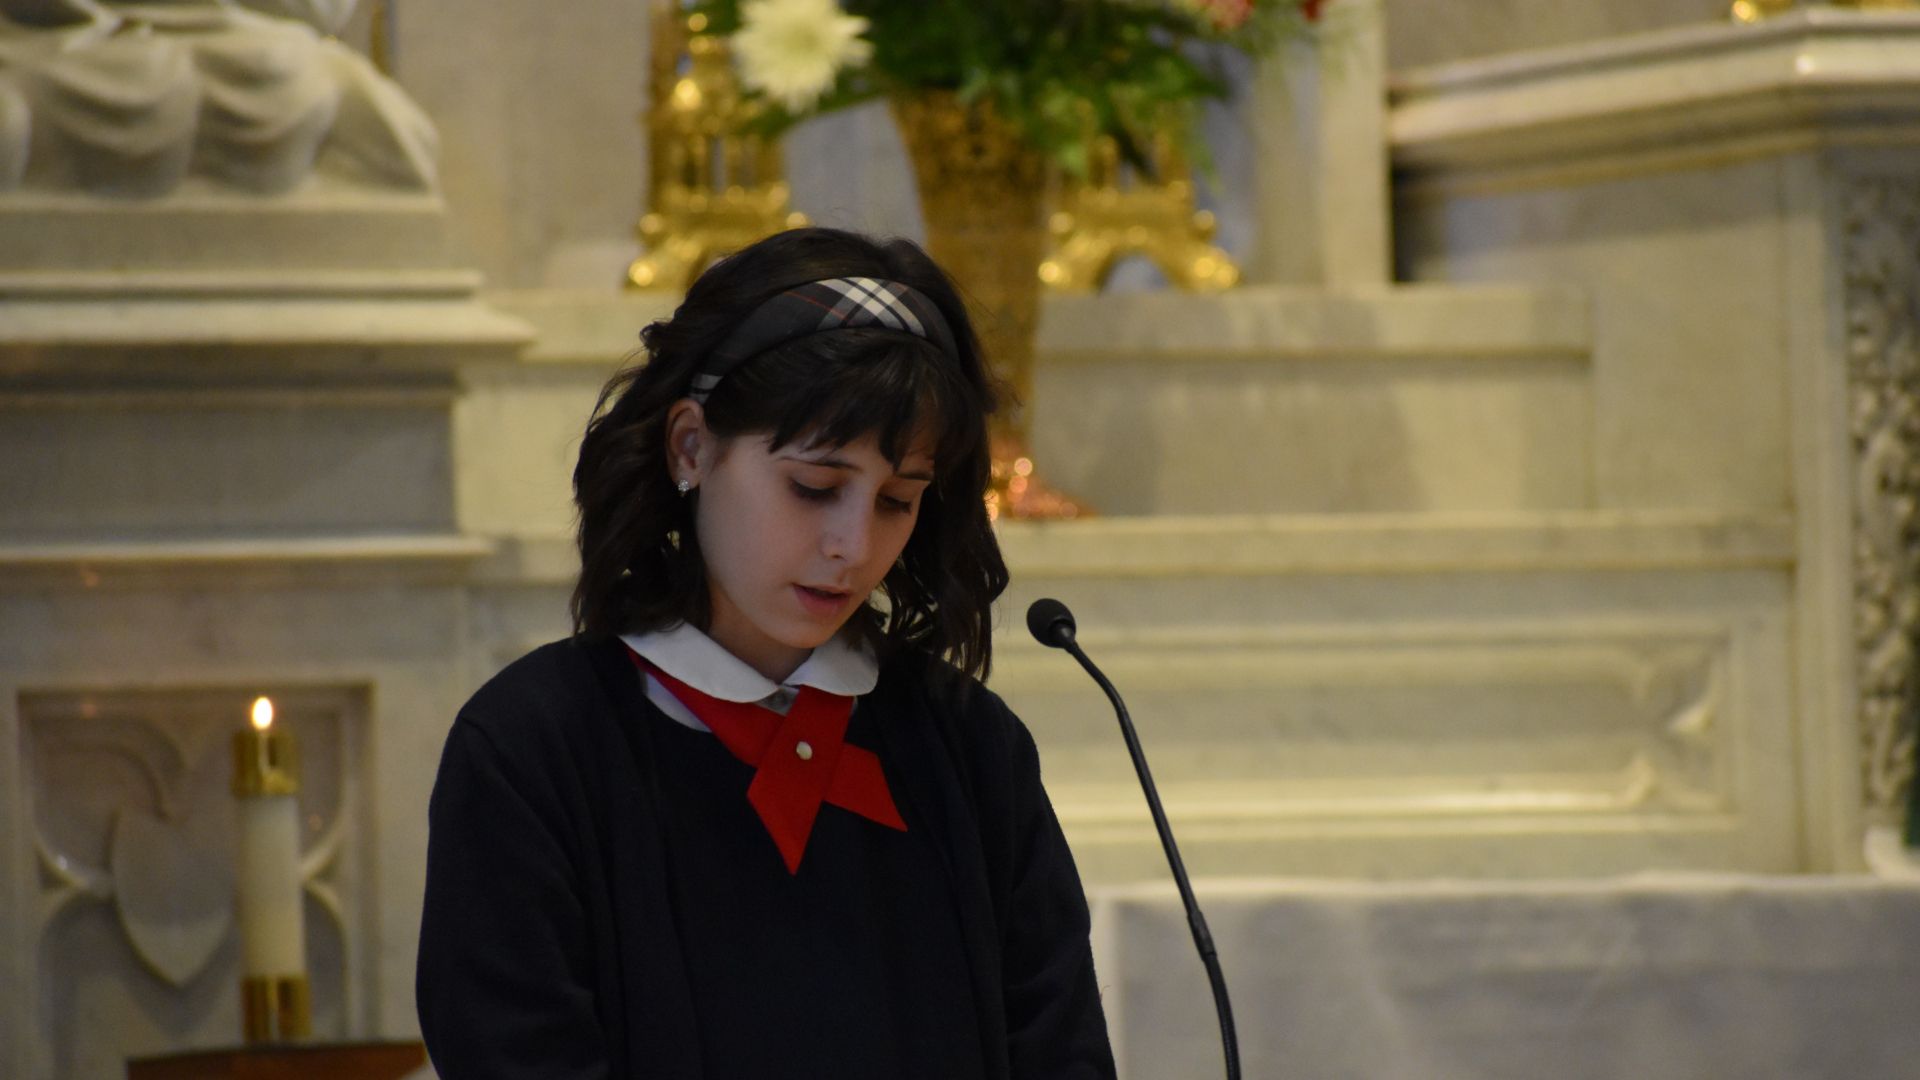 A young girl stands in front of a microphone in a church